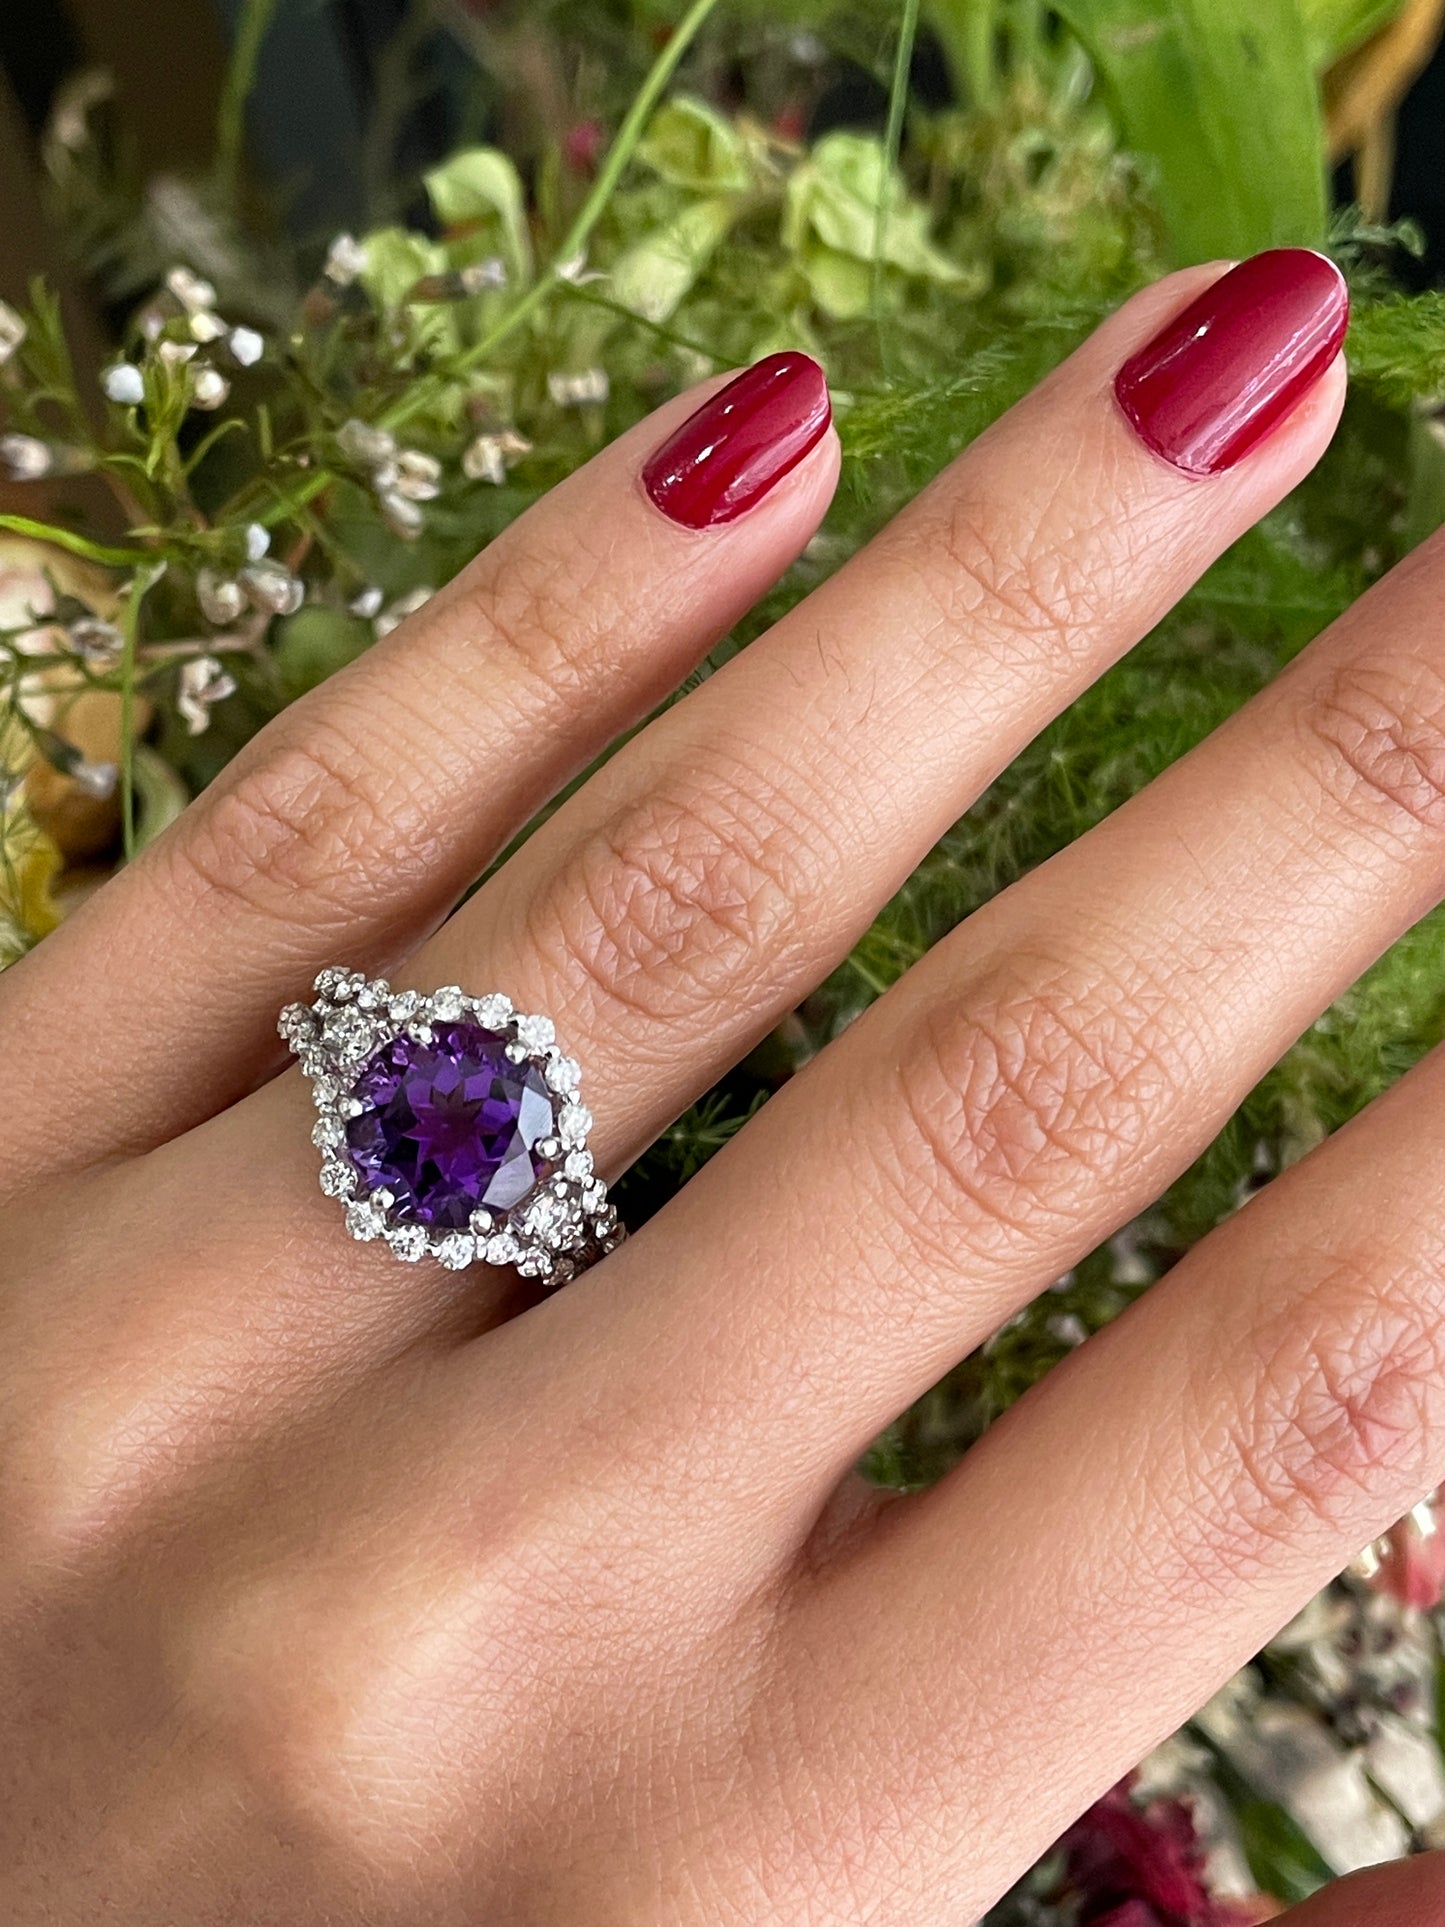 Amethyst and Diamond 18 Carat White Gold Cluster Ring